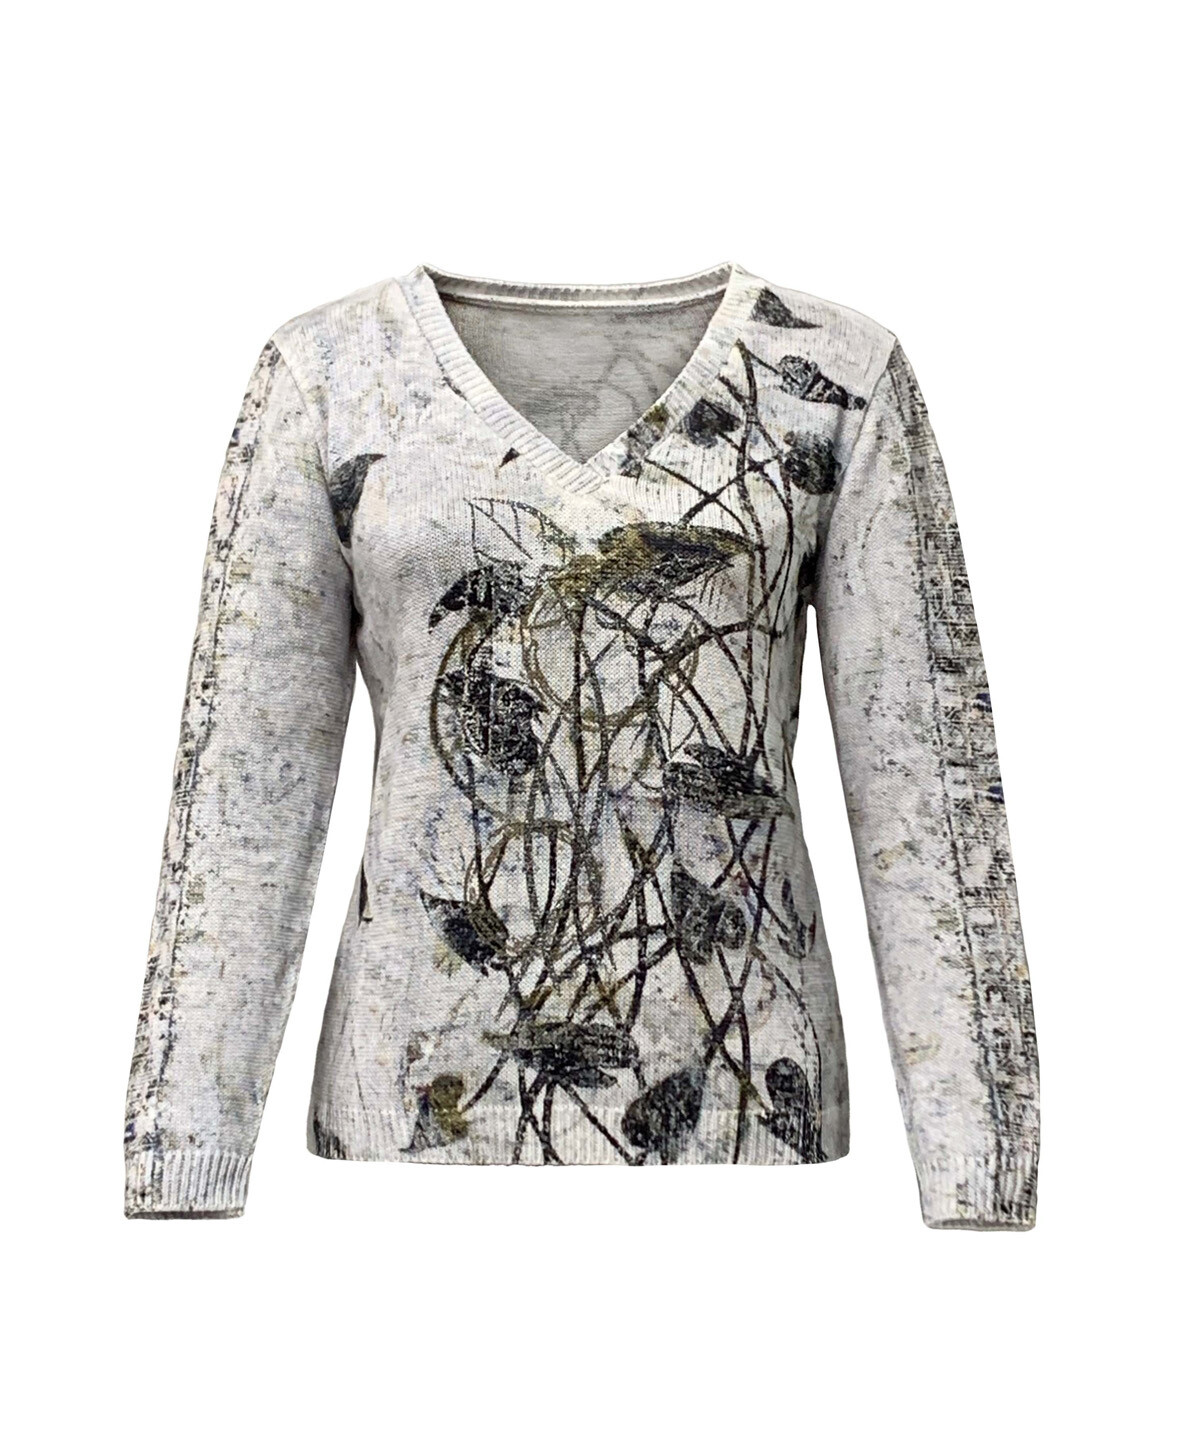 Simply Art Dolcezza: Random Acts Of Petal Beauty Abstract Art Sweater SOLD OUT